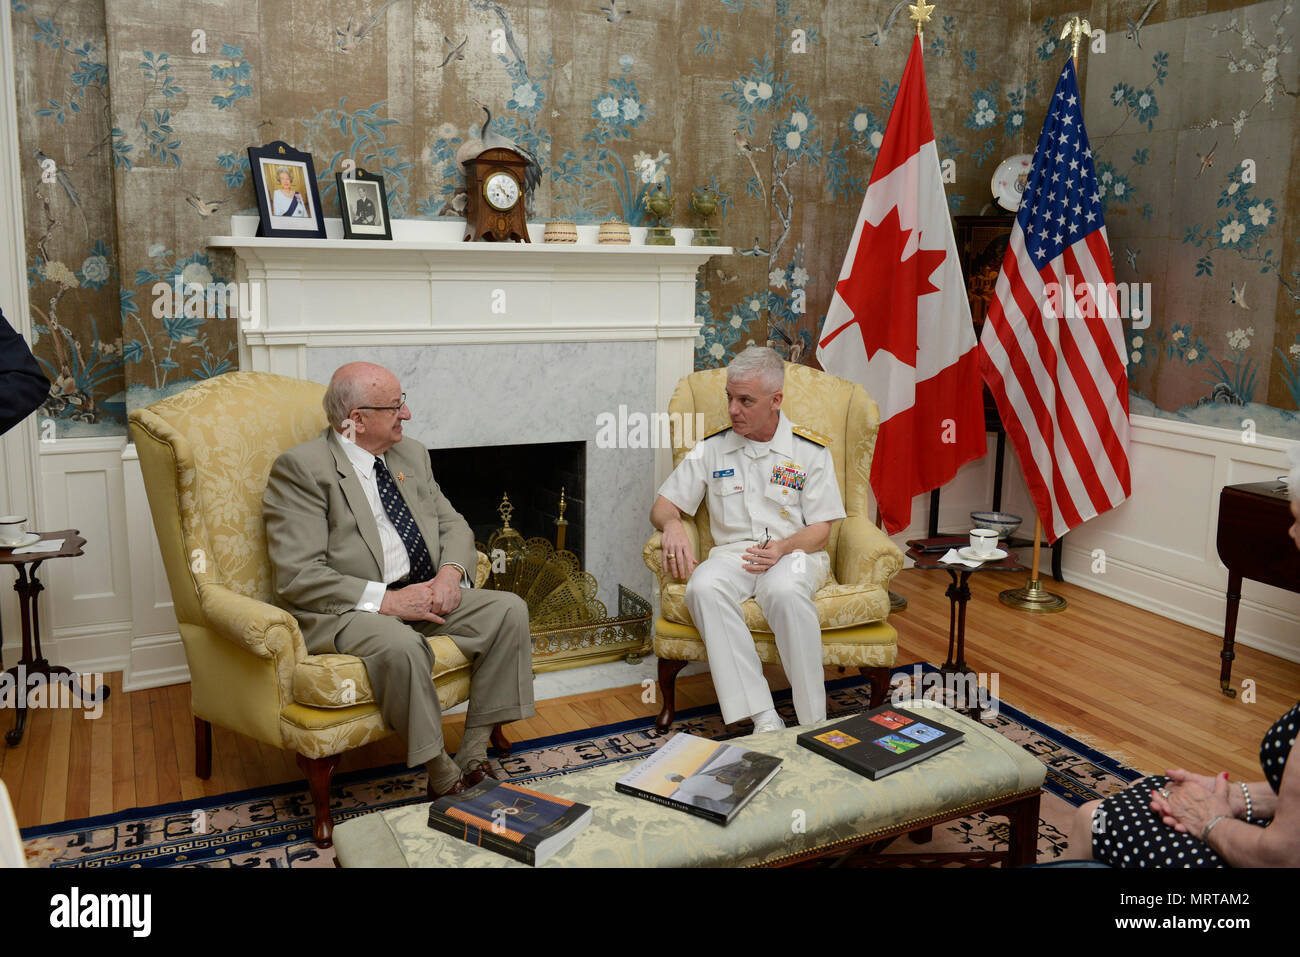 170629-N-YZ751-075   HALIFAX, Nova Scotia (June 29, 2017) Rear Adm. Jim Malloy, commander of Carrier Strike Group (CSG) 10, right, meets with Nova Scotia Lieutenant-Governor Arthur LeBlanc. Malloy is meeting senior leadership in Halifax, Nova Scotia, as part of the Canada 150 anniversary celebration with the aircraft carrier USS Dwight D. Eisenhower (CVN 69)(Ike) port visit. (U.S. Navy photo by Mass Communication Specialist 1st Class Tony D. Curtis) Stock Photo